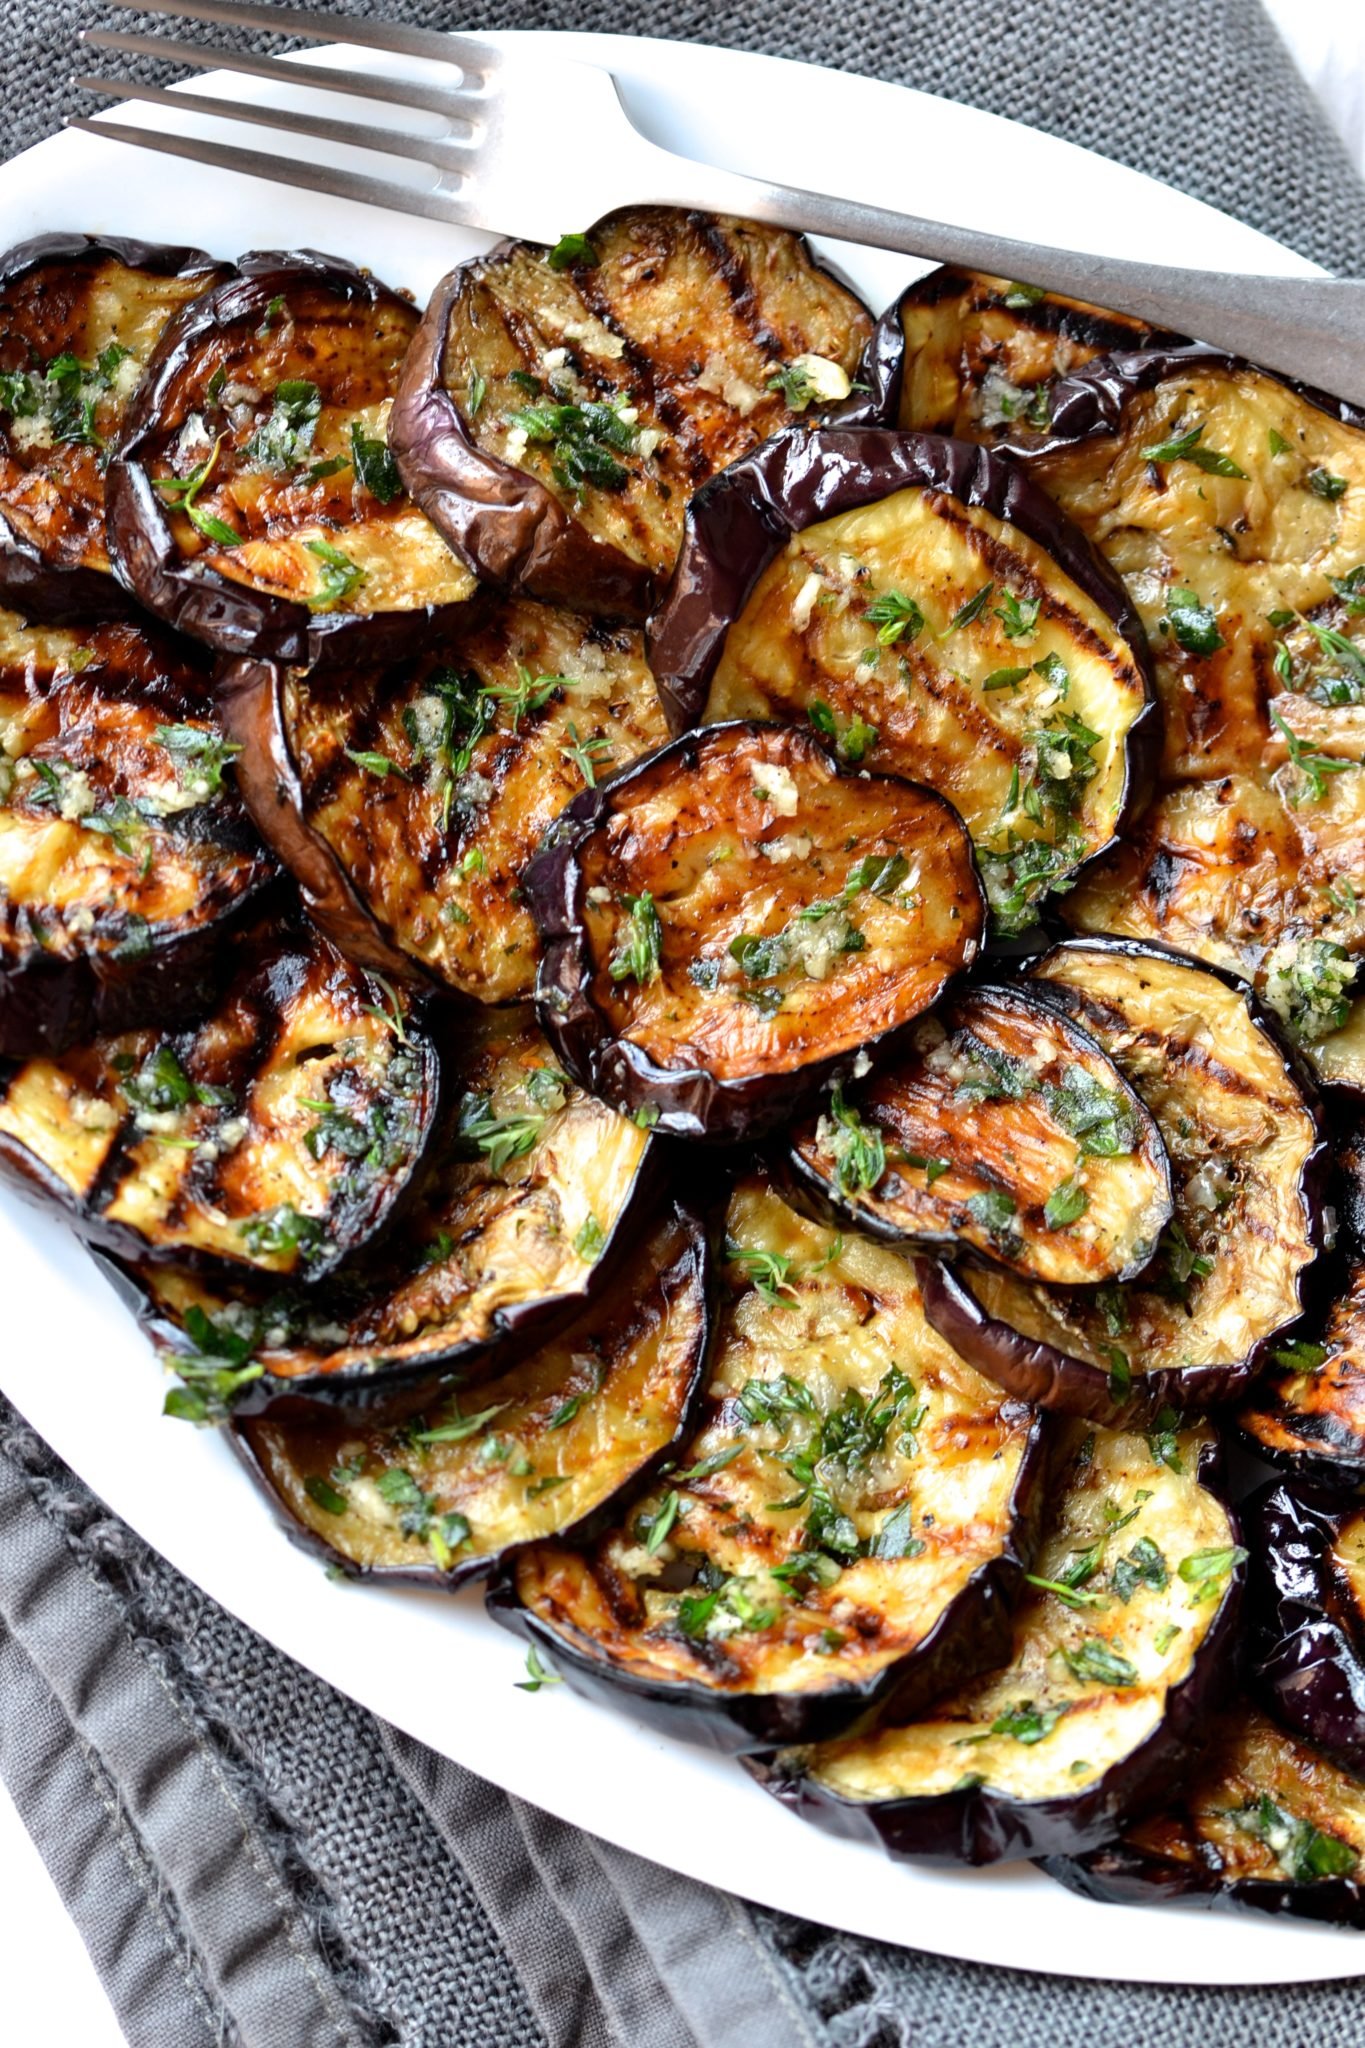 Garlic Herb Grilled Eggplant Paleo Whole30 Every Last Bite,How To Make Salmon Patties Easy